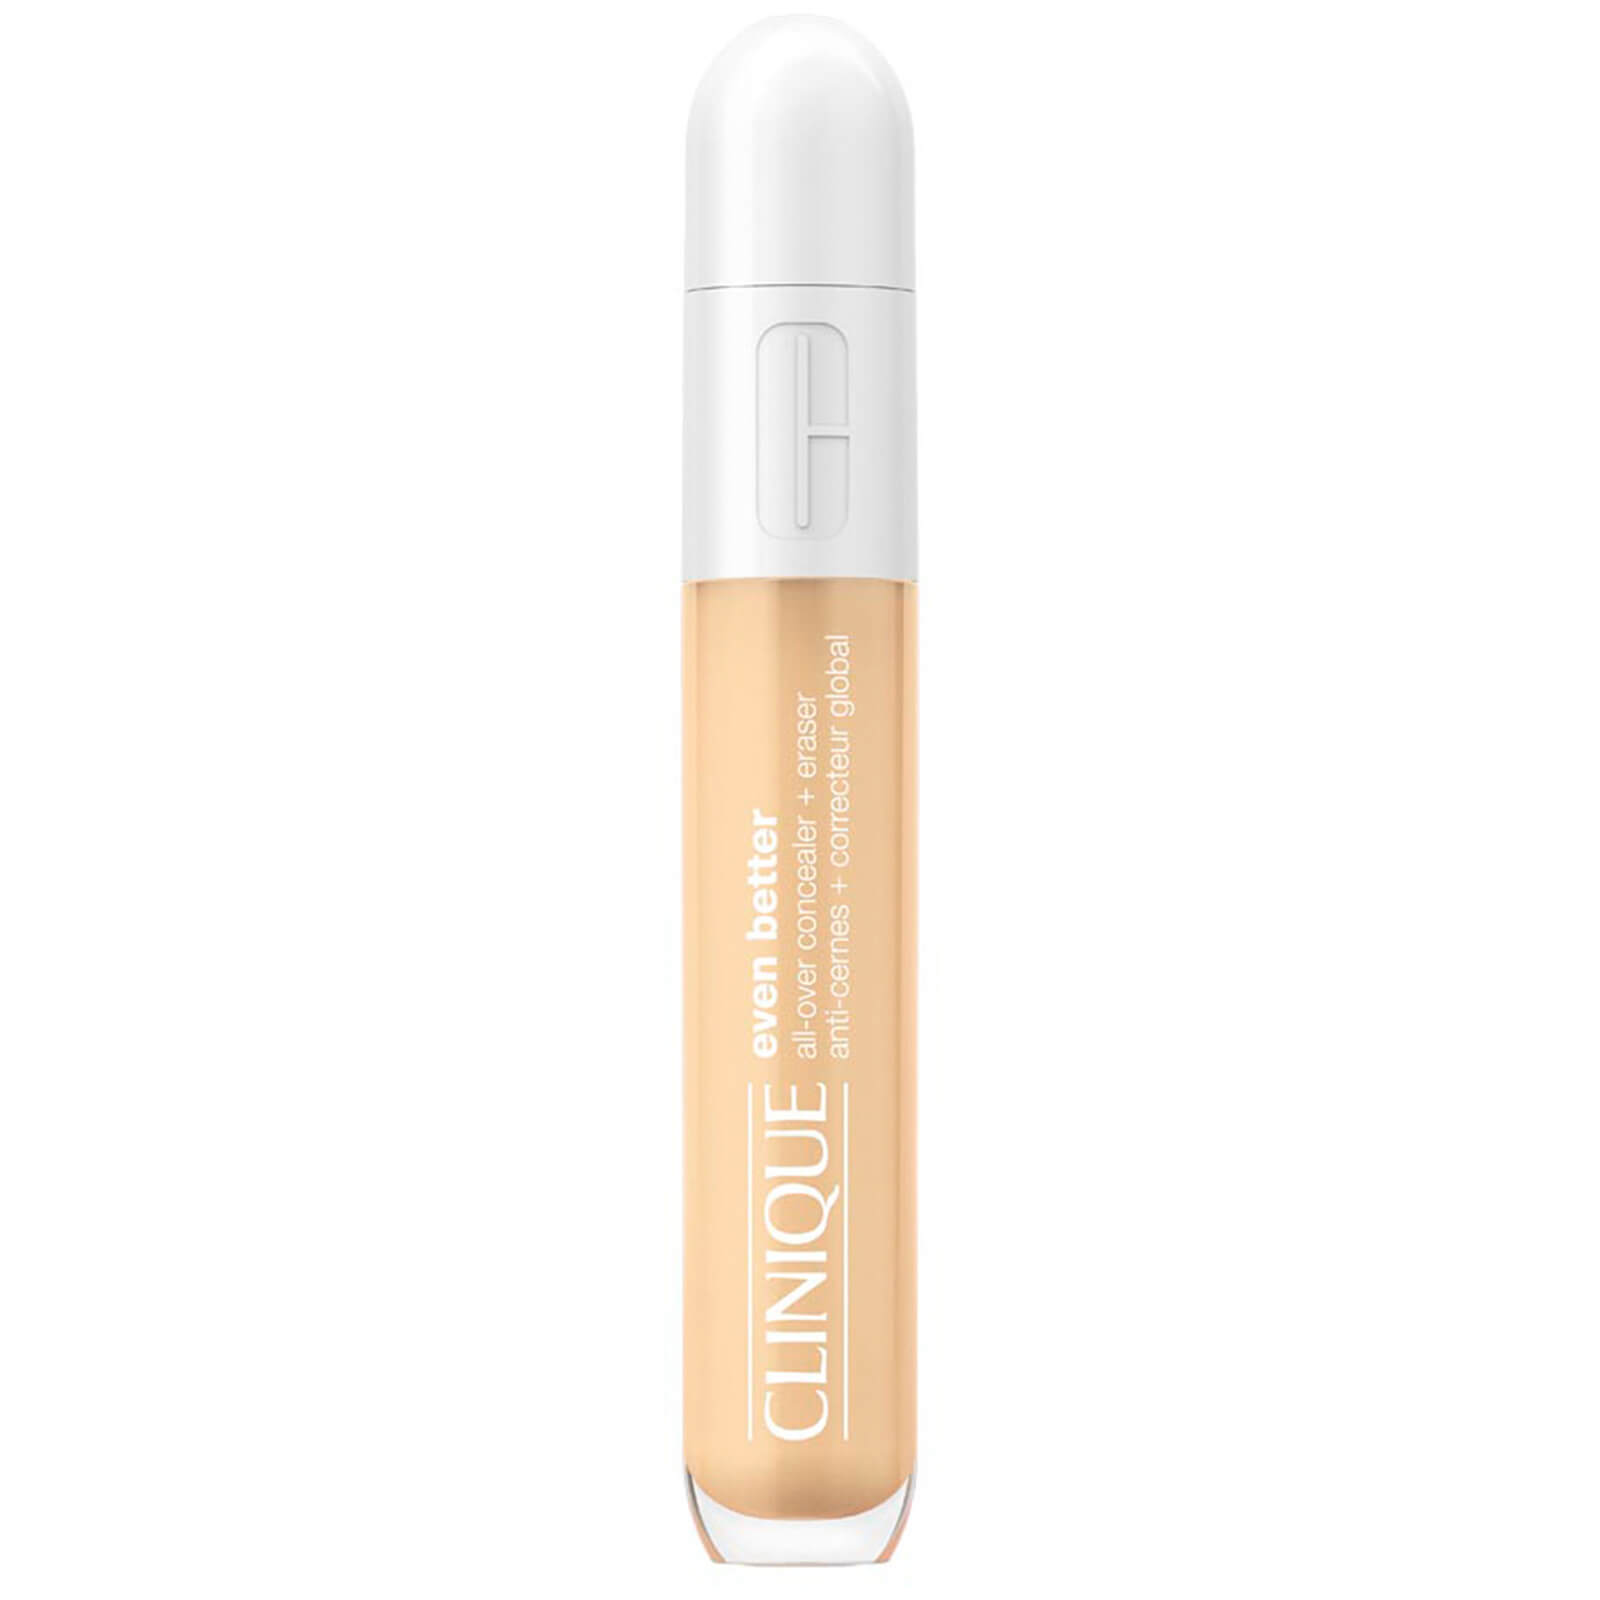 Clinique Even Better All-Over Concealer and Eraser 6ml (Various Shades) - CN 08 Linen